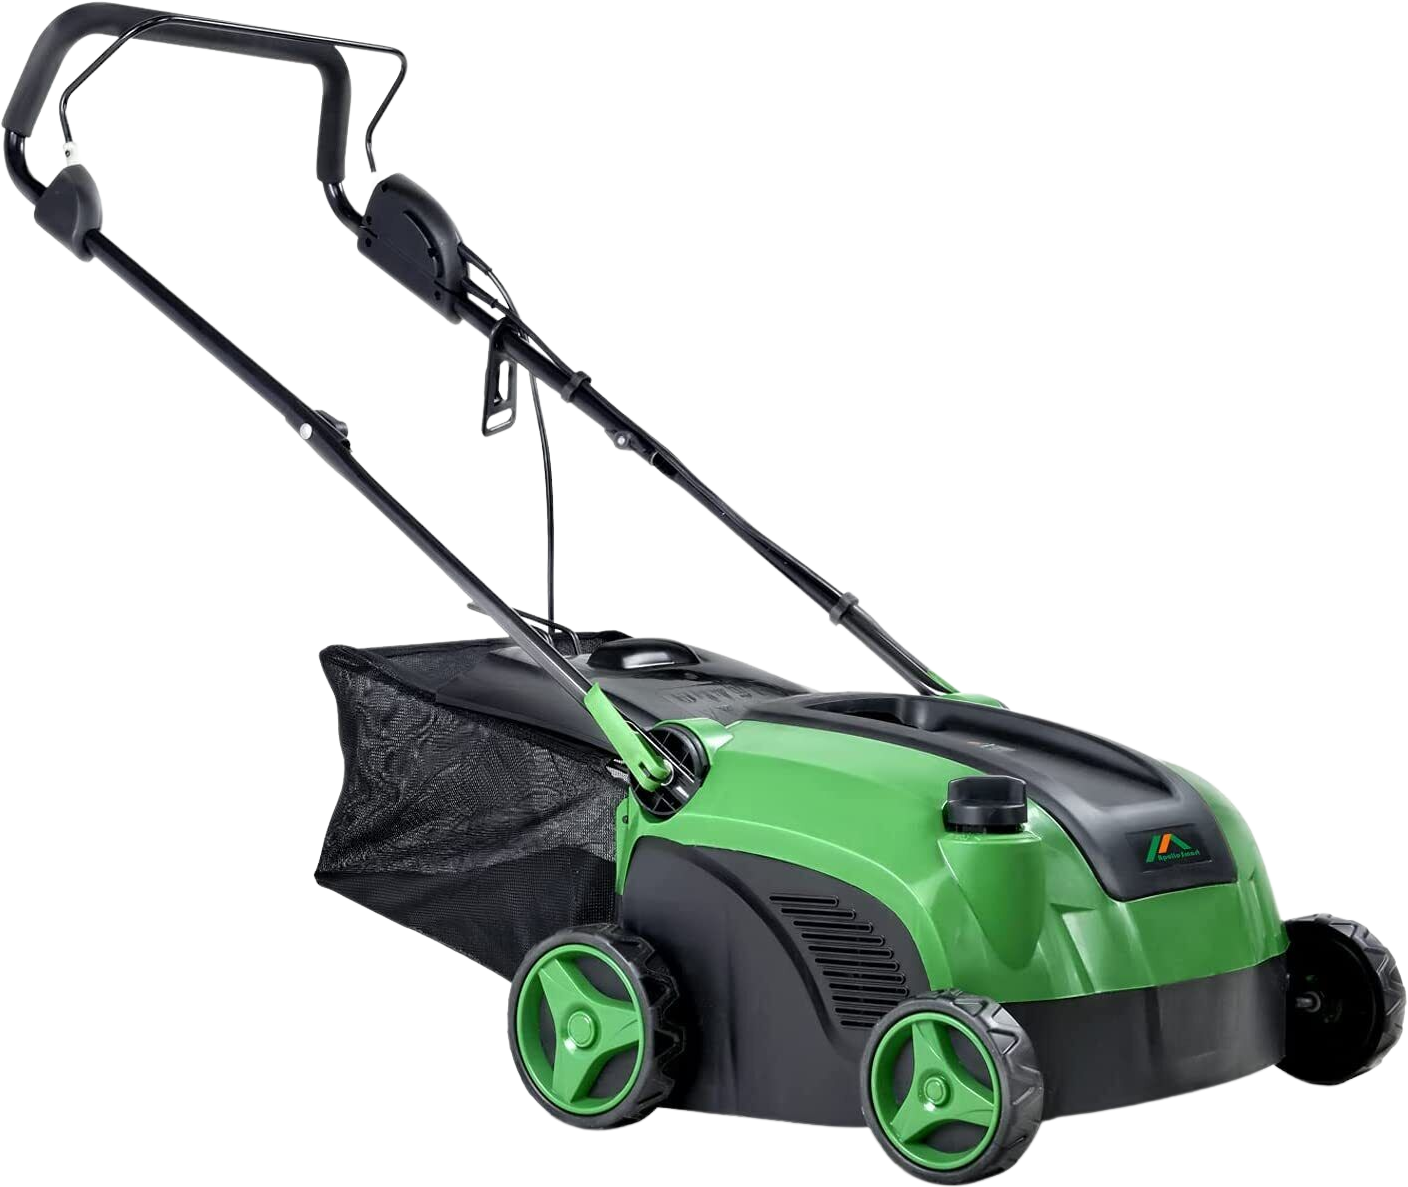 Apollo Smart, Apollo Smart GUT089 2 in 1 Walk Behind Scarifier Lawn Dethatcher Raker Corded Electric 120V 12 Amp 15" with Collection Bag New